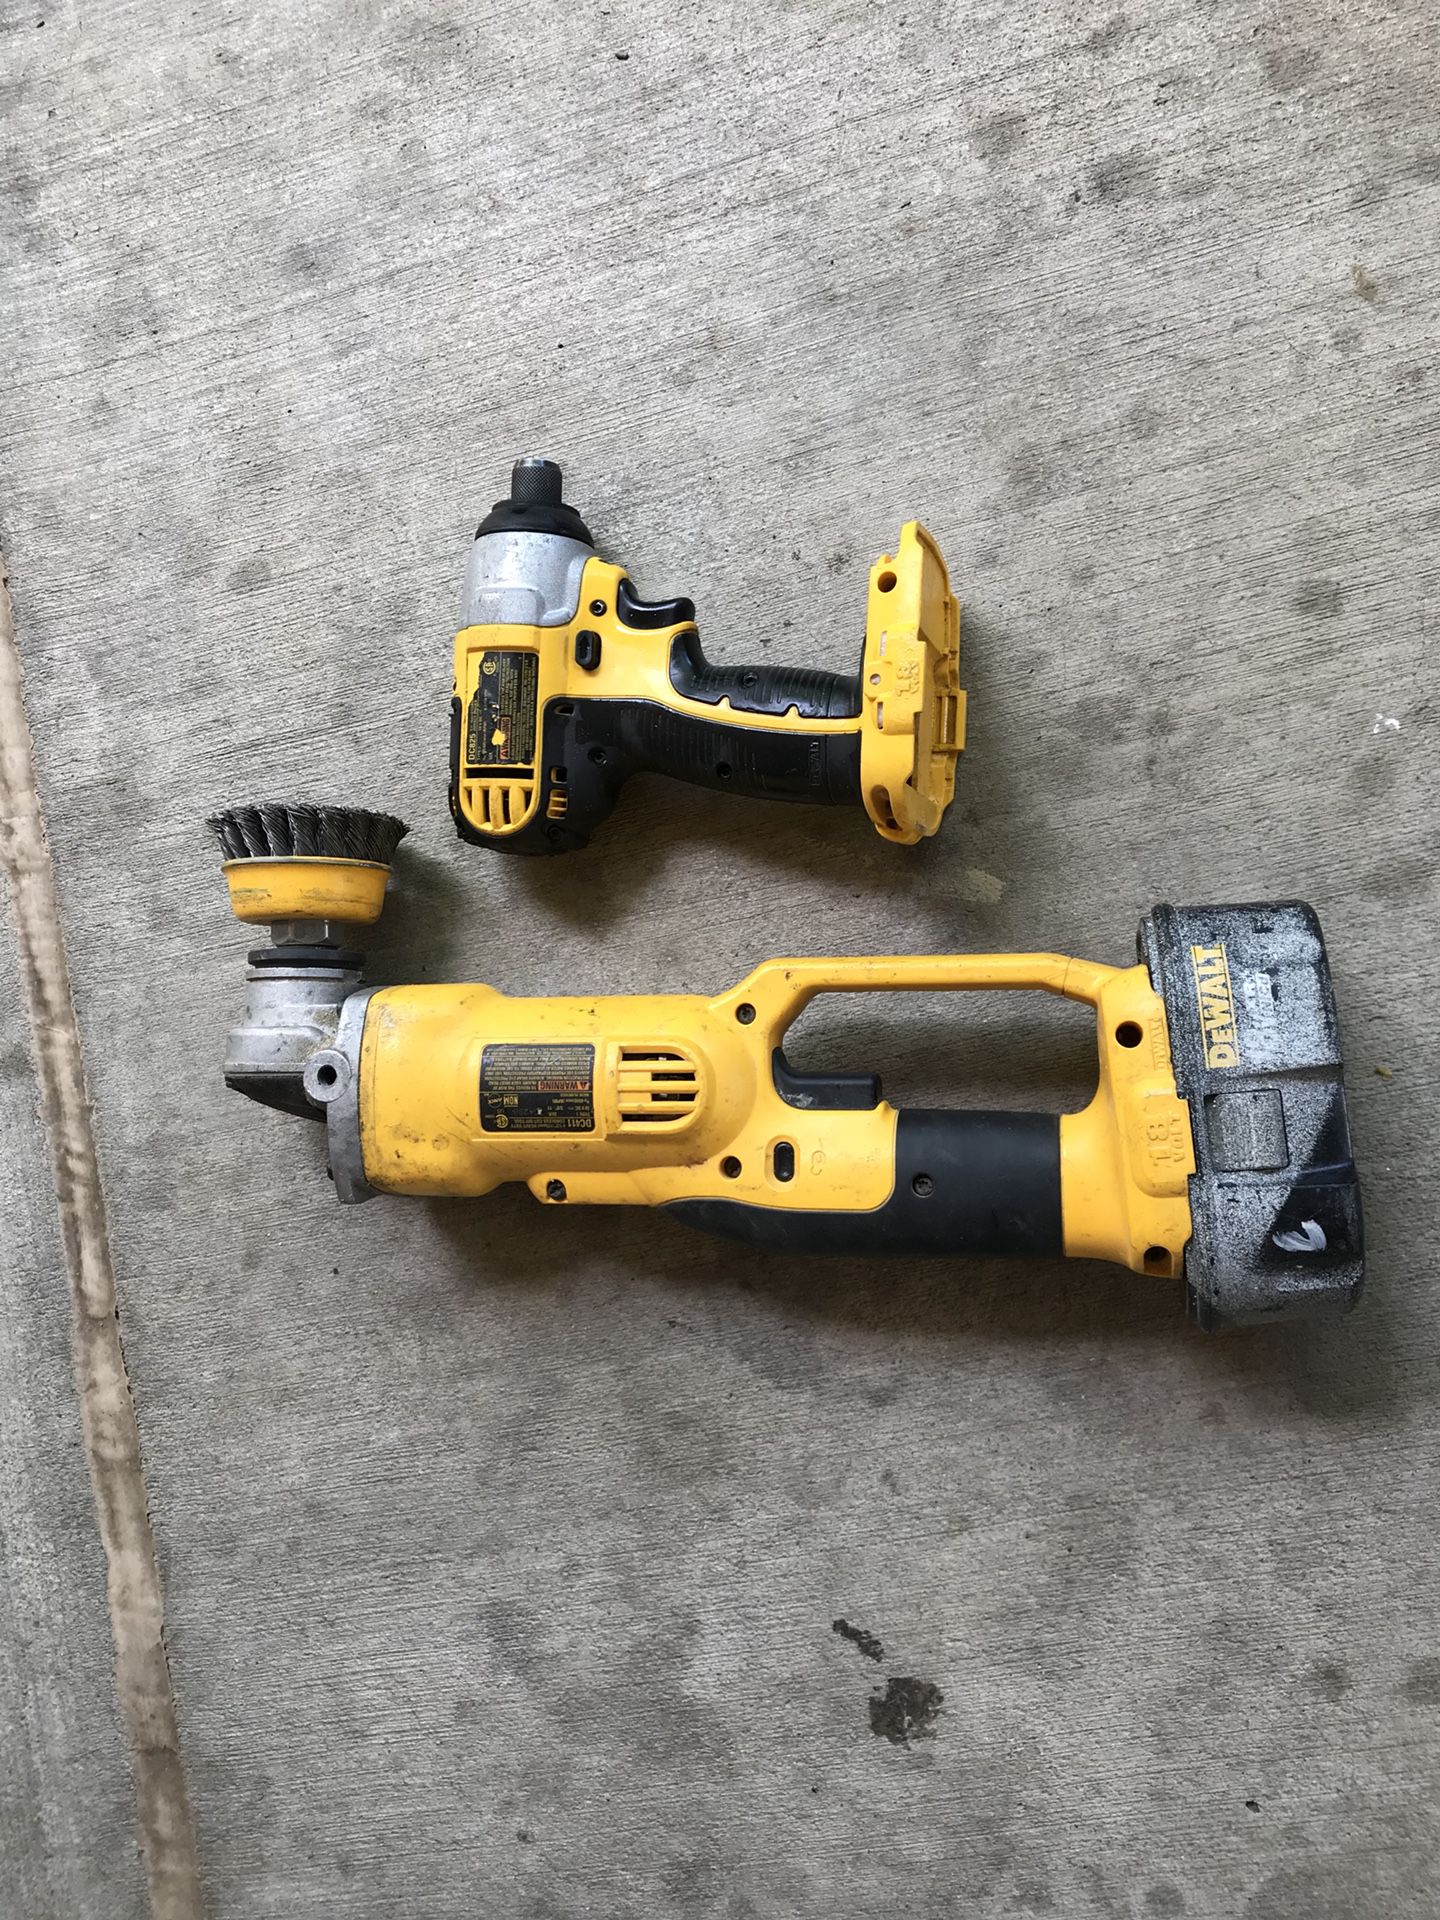 Dewalt cordless hand drill and impact wrench